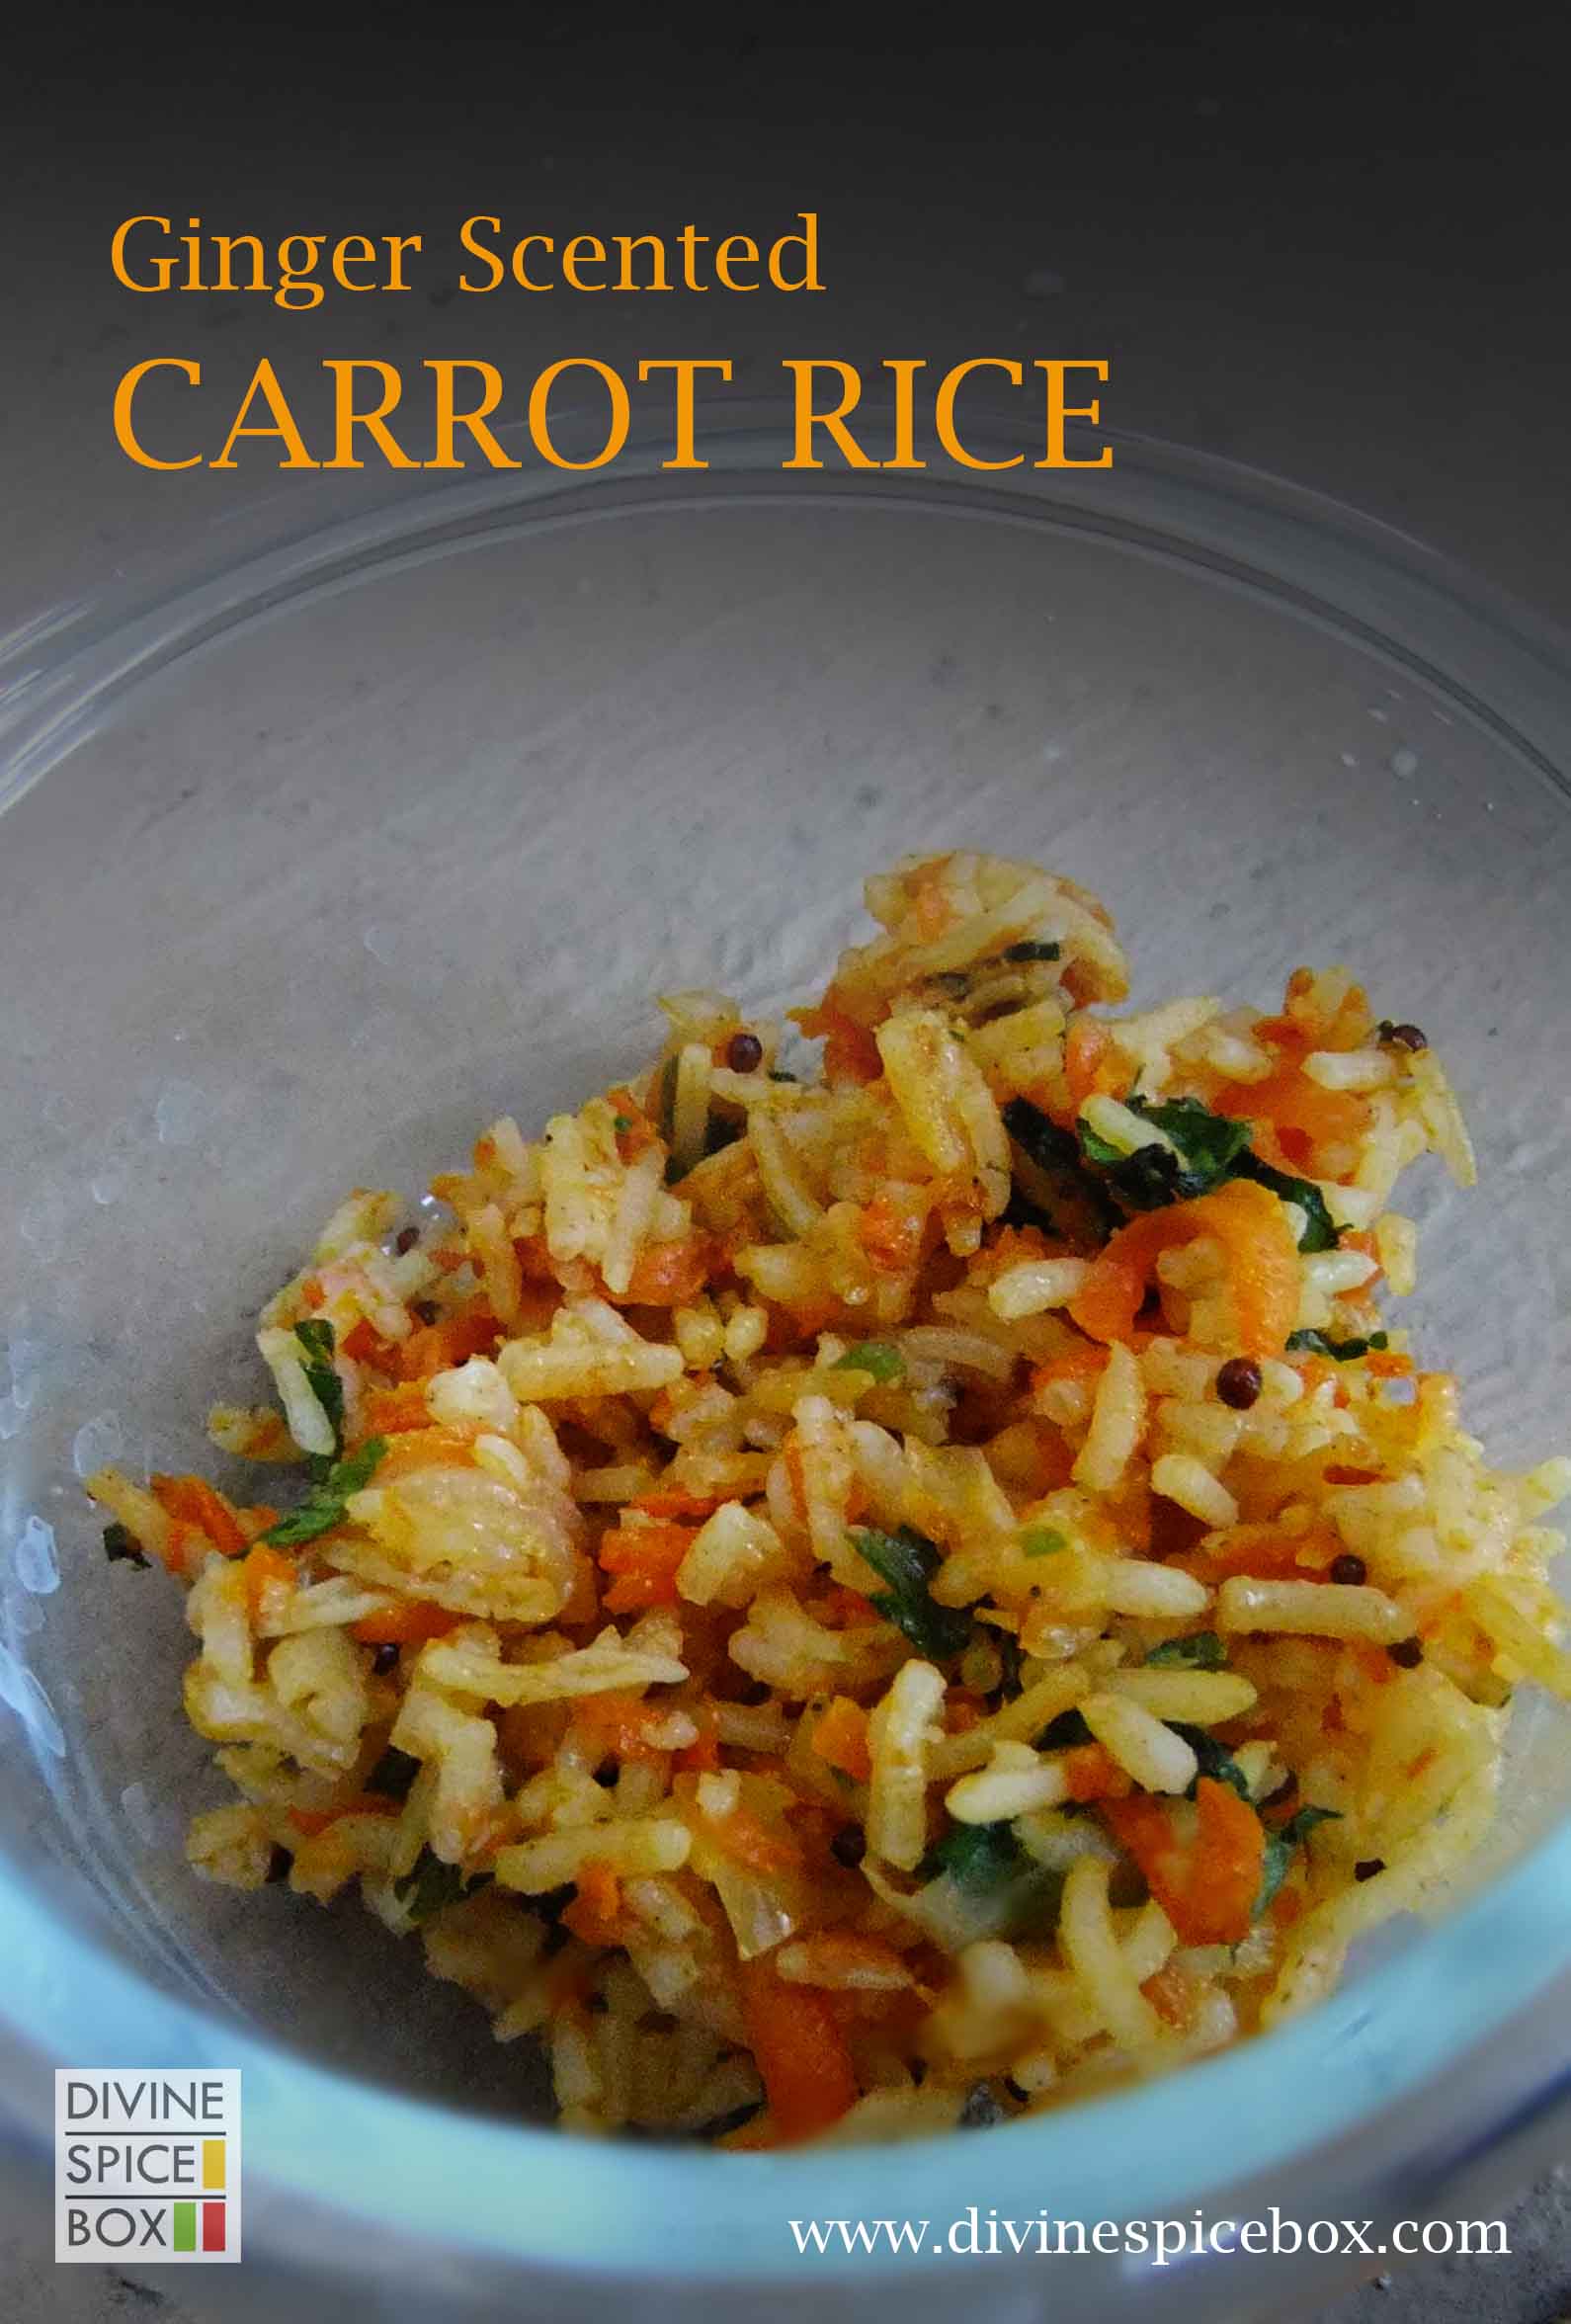 ginger scented carrot rice copy